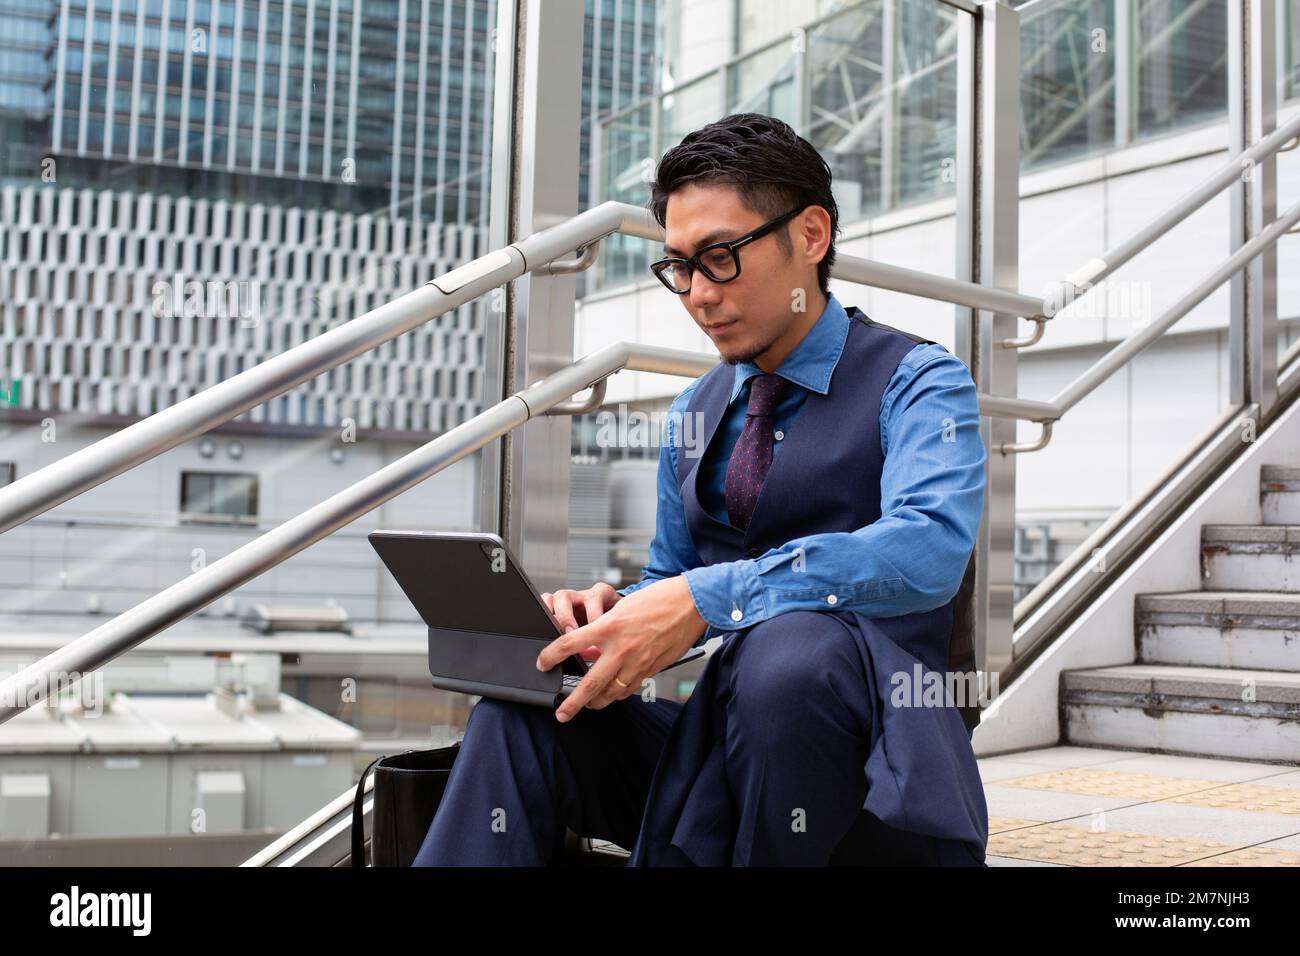 A young businessman in the city, on the move, seated on the stairs by a window, using a laptop. Stock Photo